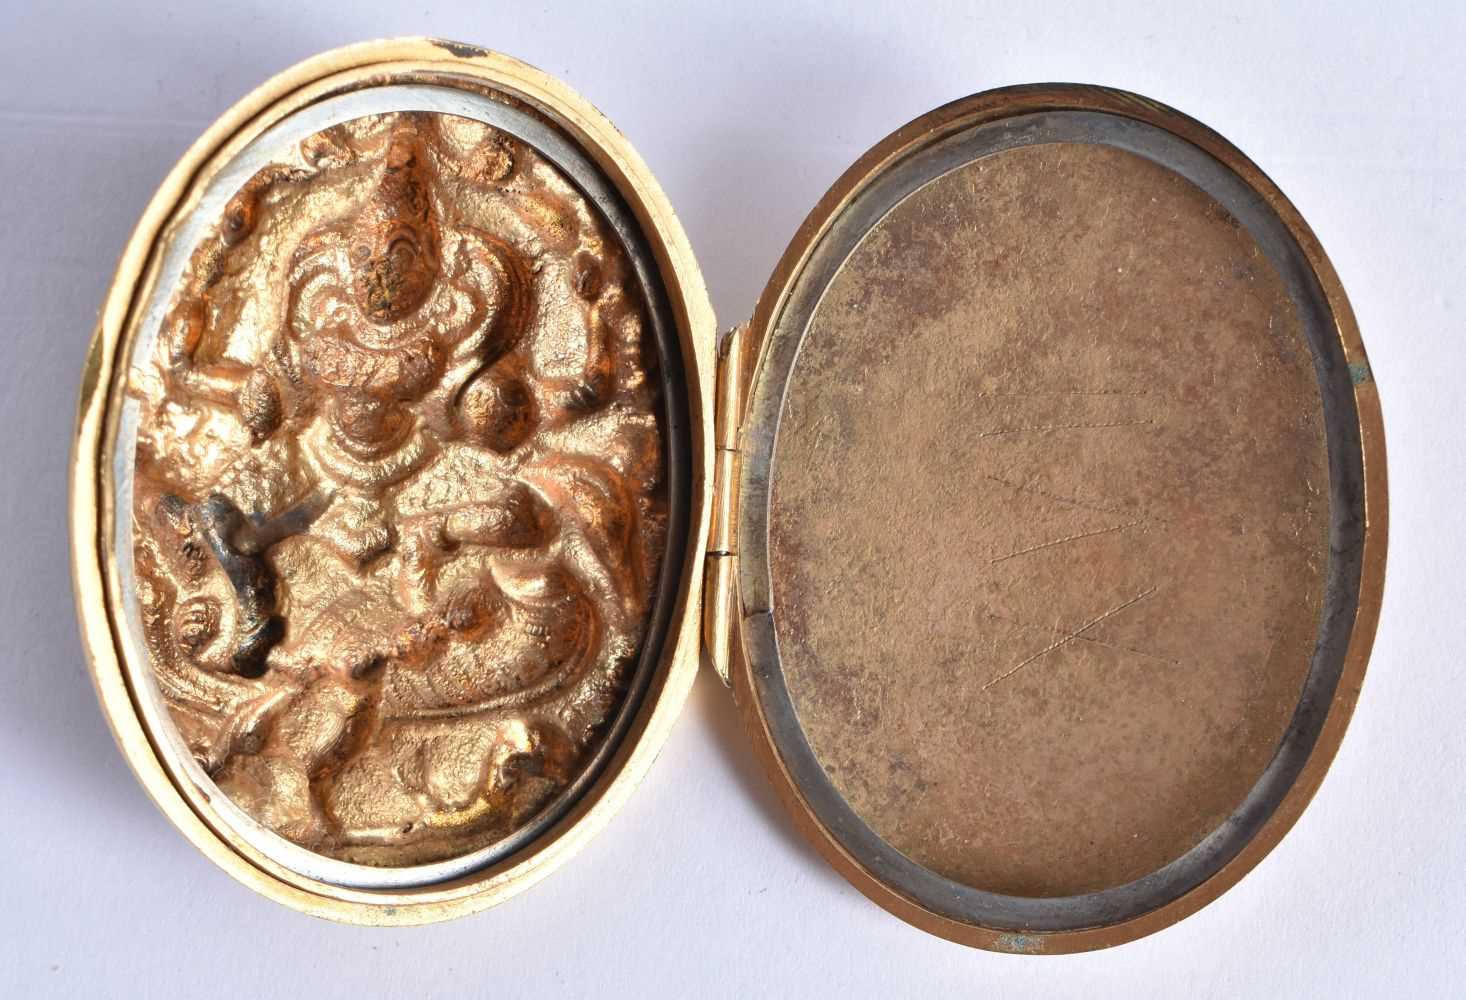 A Yellow Metal Locket Brooch (possibly Burmese Gold). 5cm x 4cm x 1.8cm, weight 15.4g. - Image 3 of 4